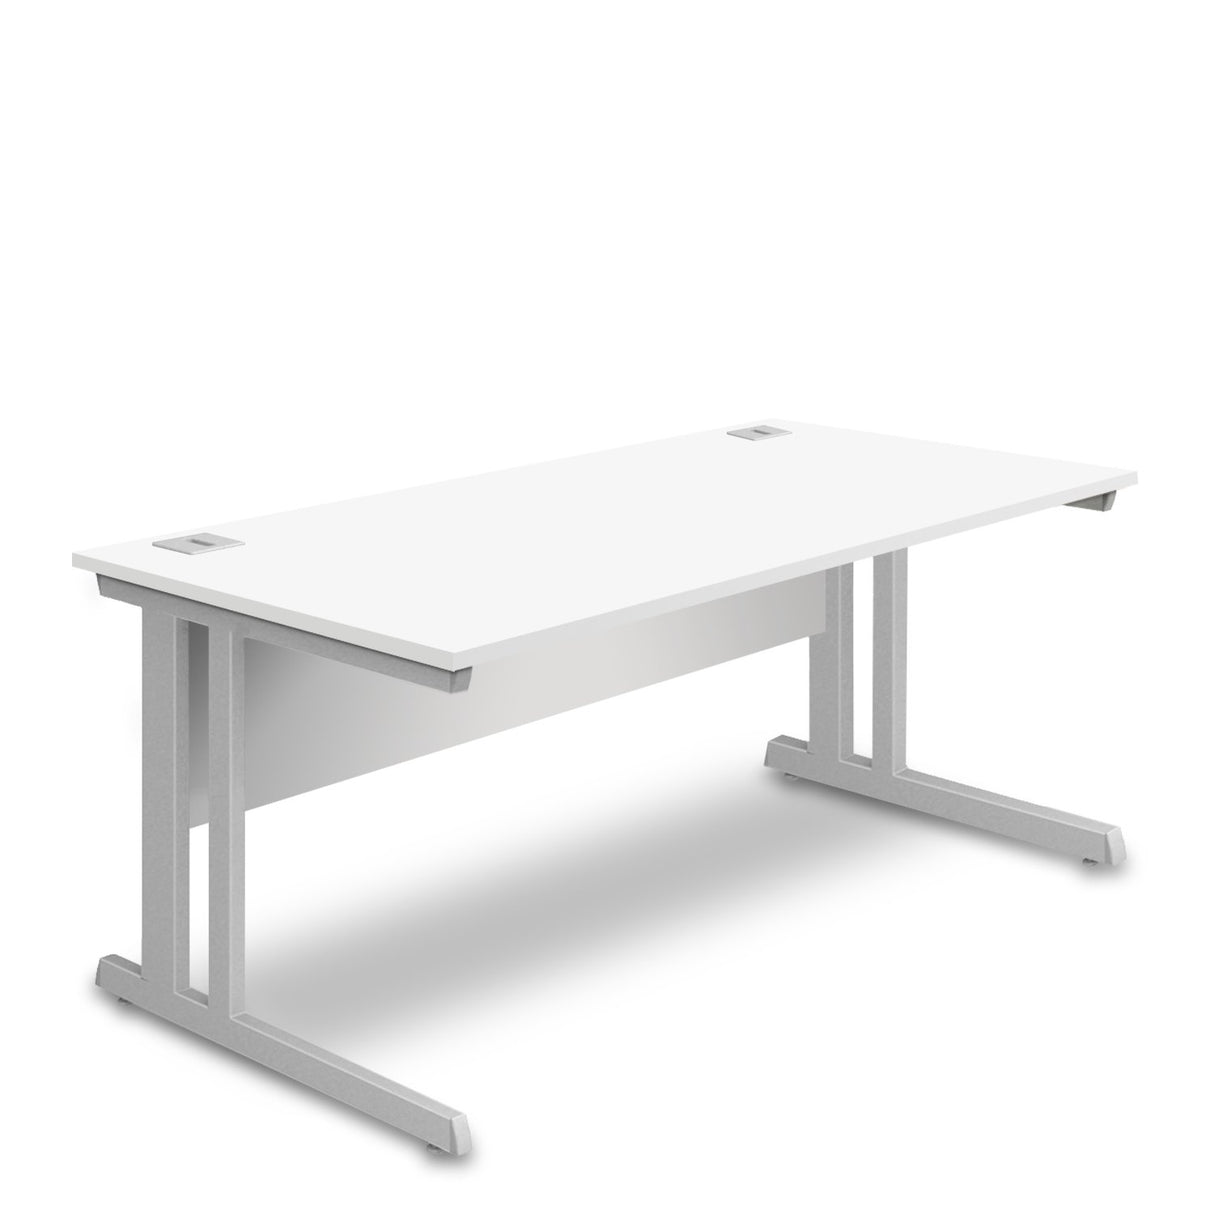 Nautilus Designs Aspire - Rectangular Desk - 1400mm Wide with Cable Management & Modesty Panel